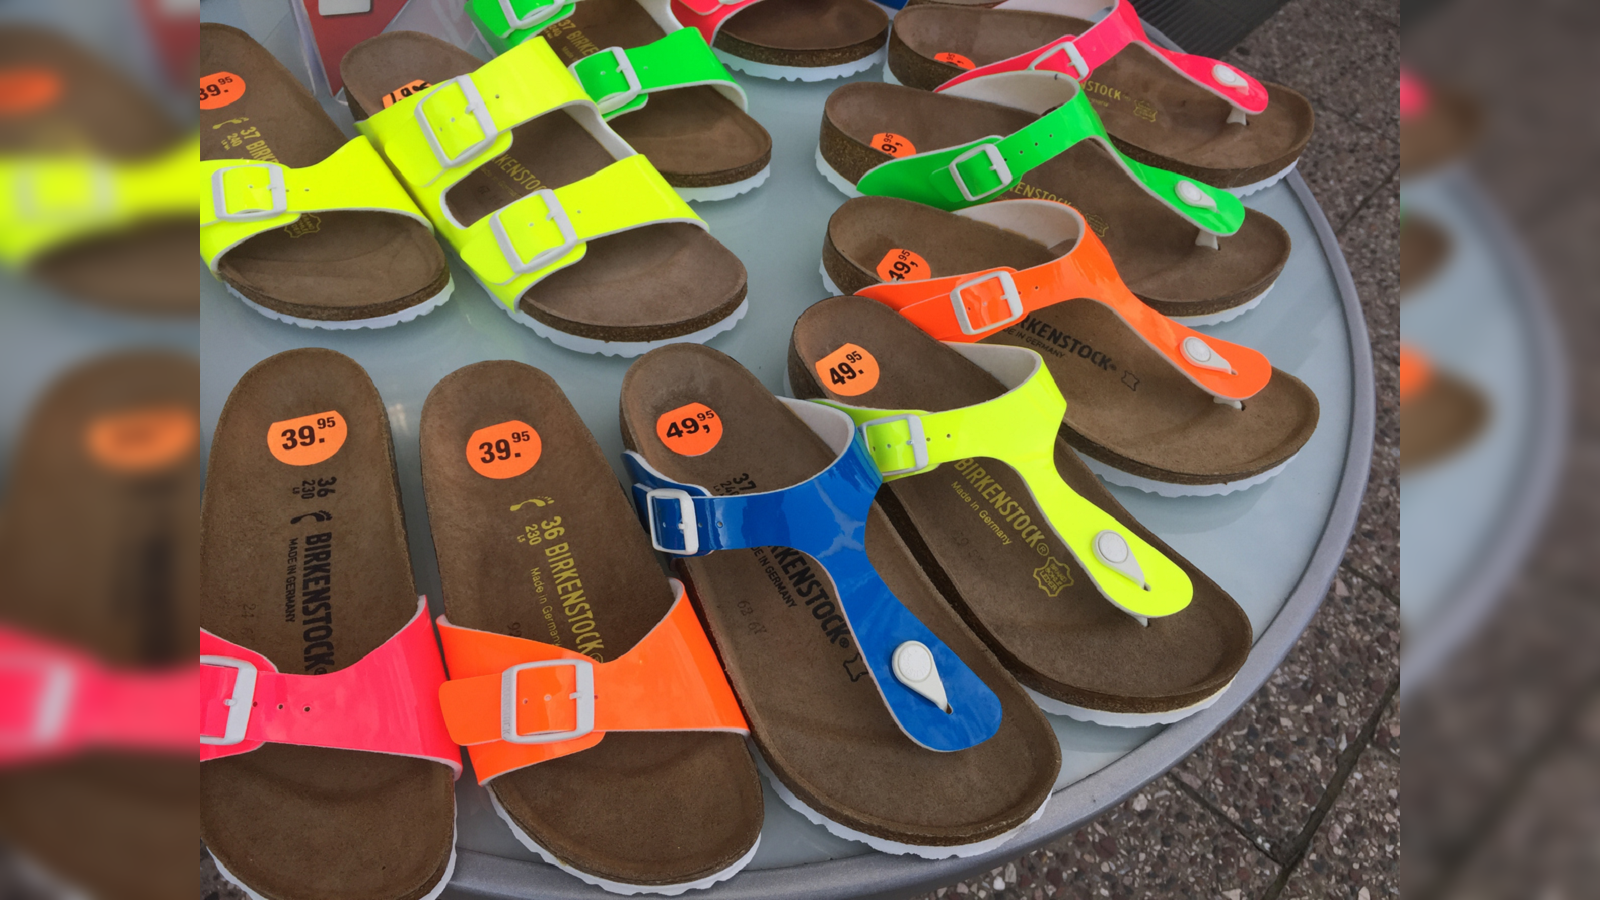 LVMH-backed private equity firm L Catterton to acquire Birkenstock